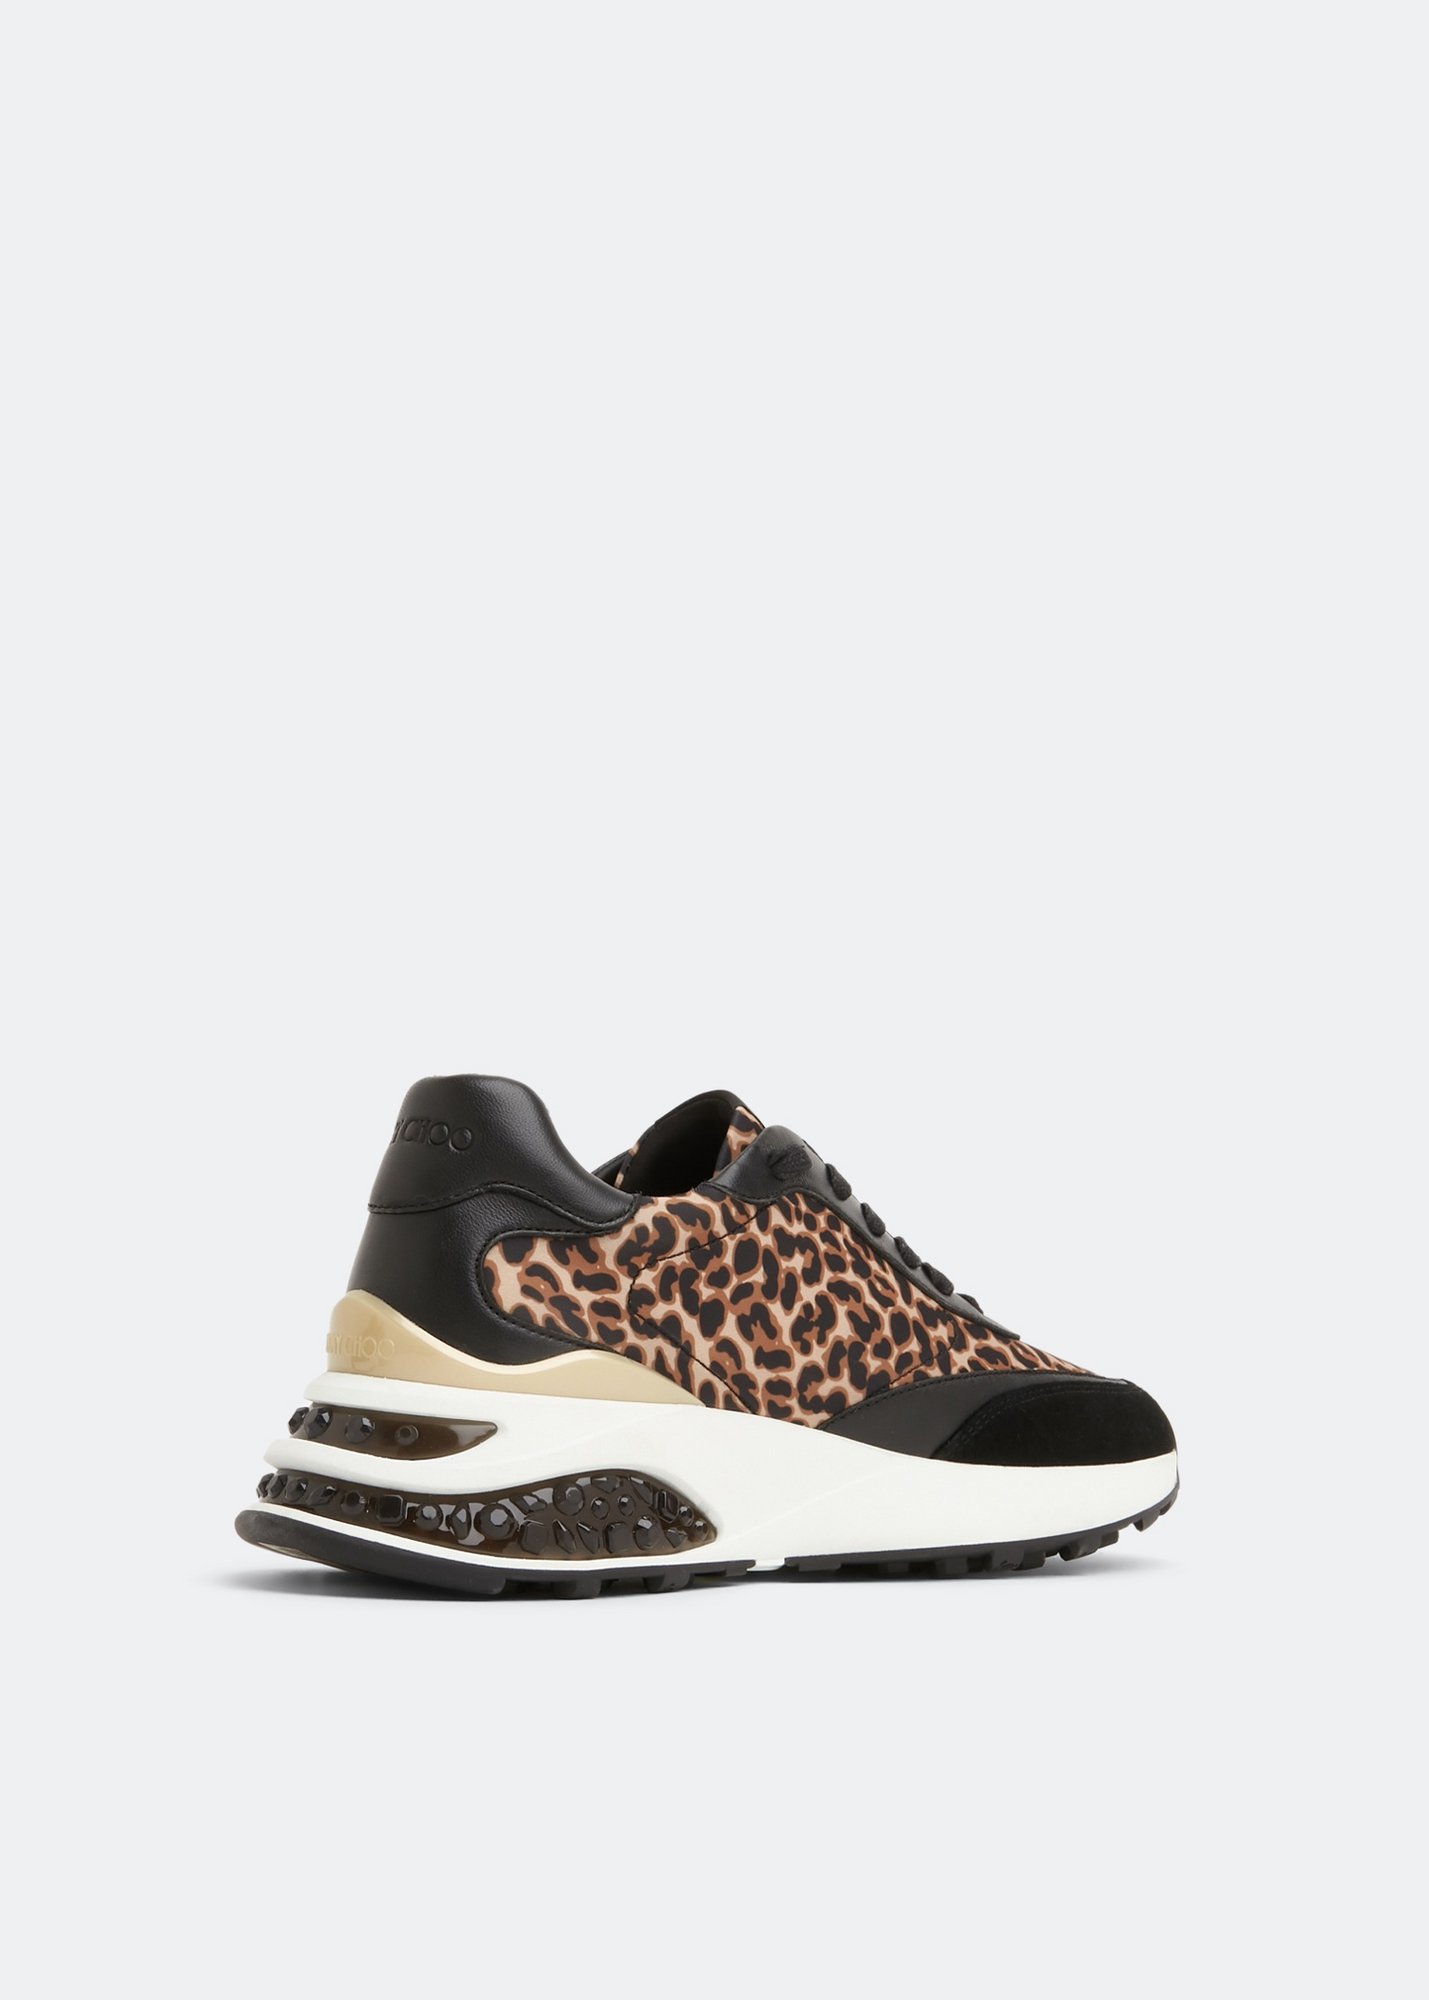 Jimmy Choo Memphis lace-up sneakers for Women - Animal print in